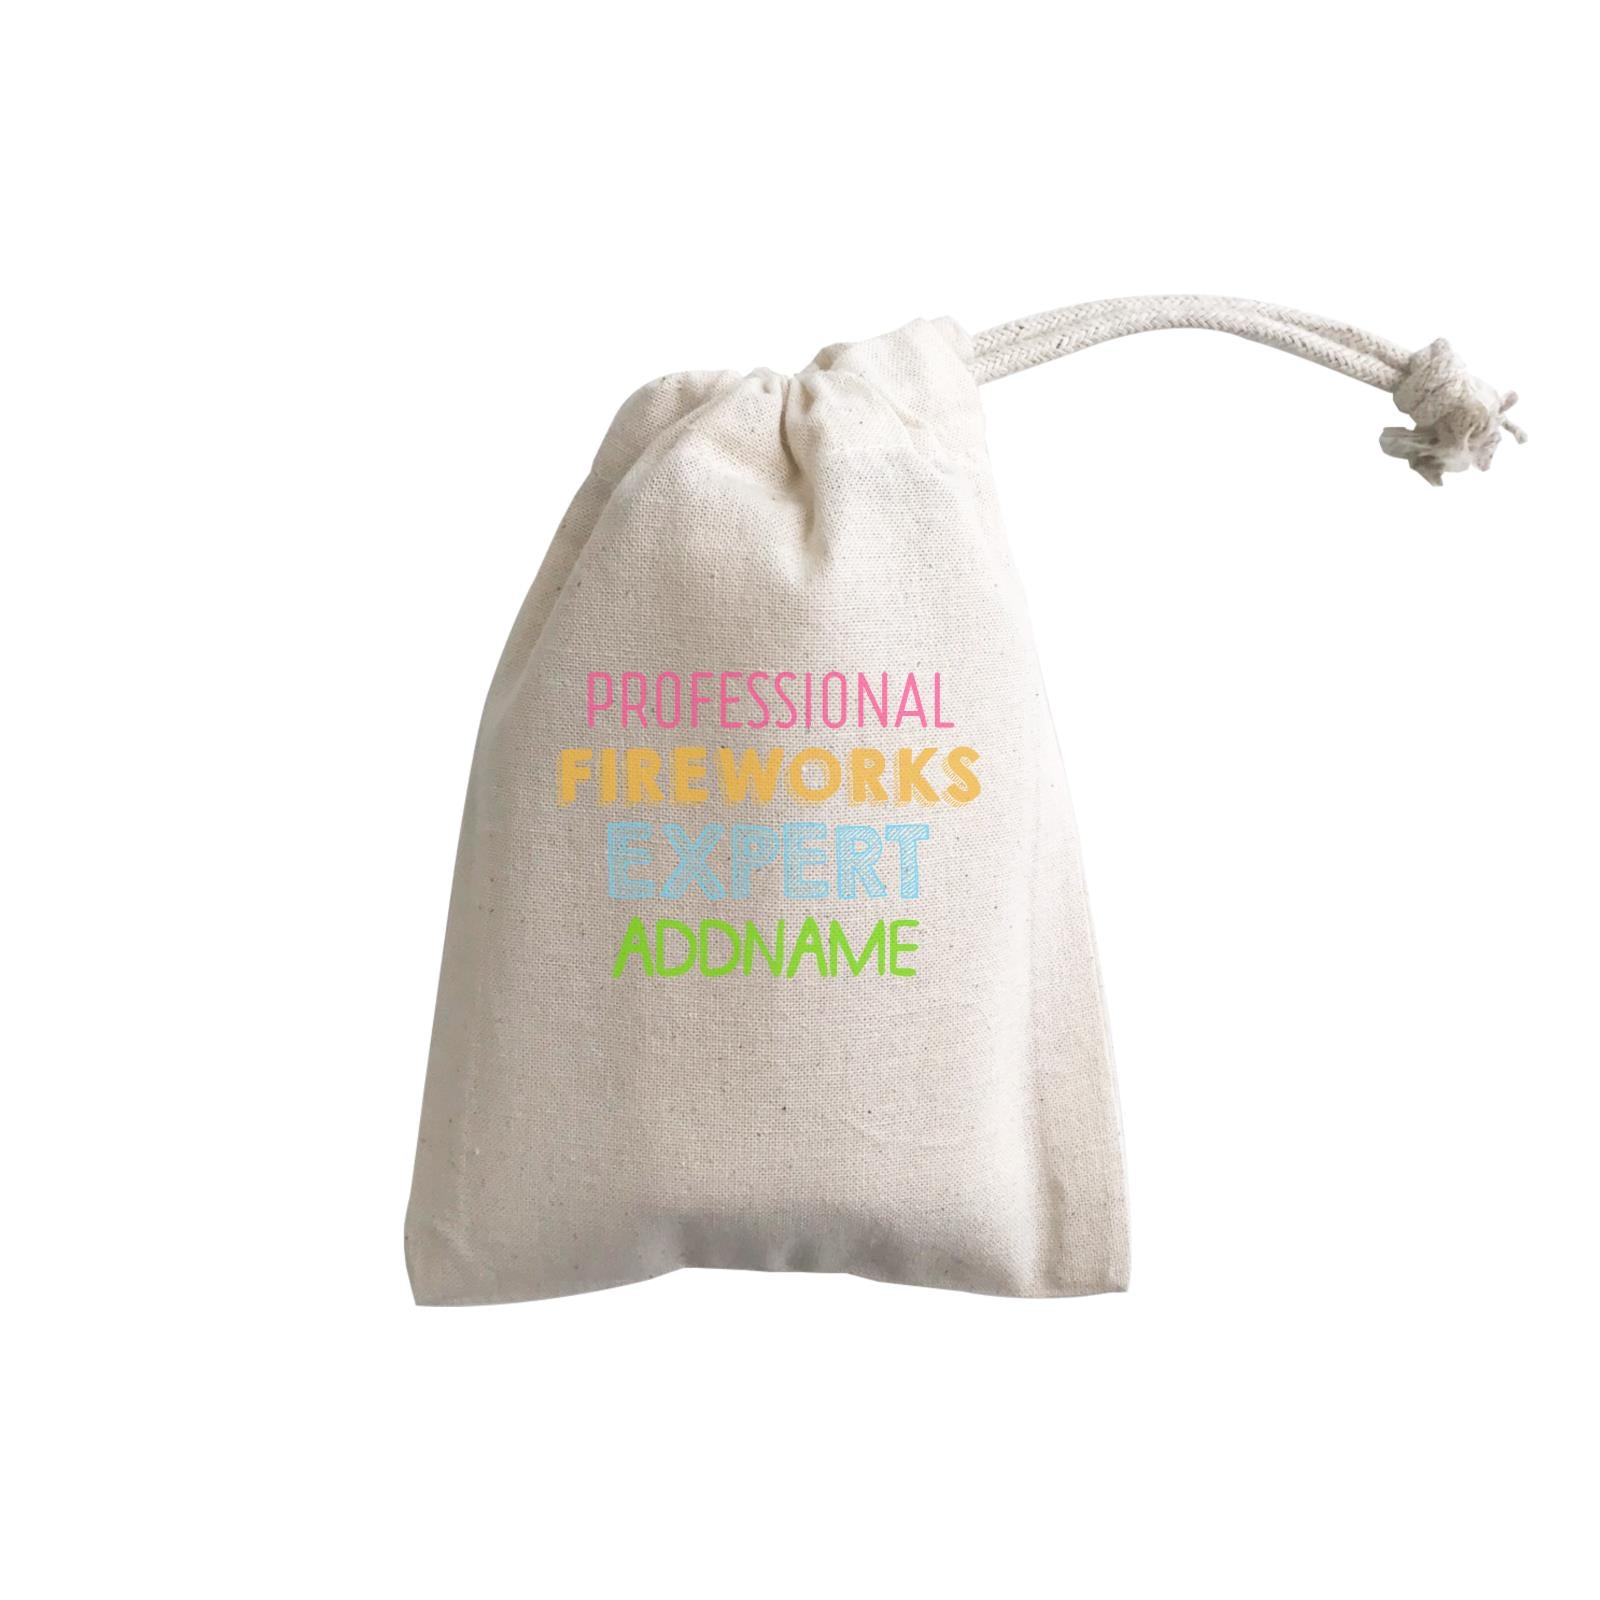 Professional Fireworks Expert Addname GP Gift Pouch